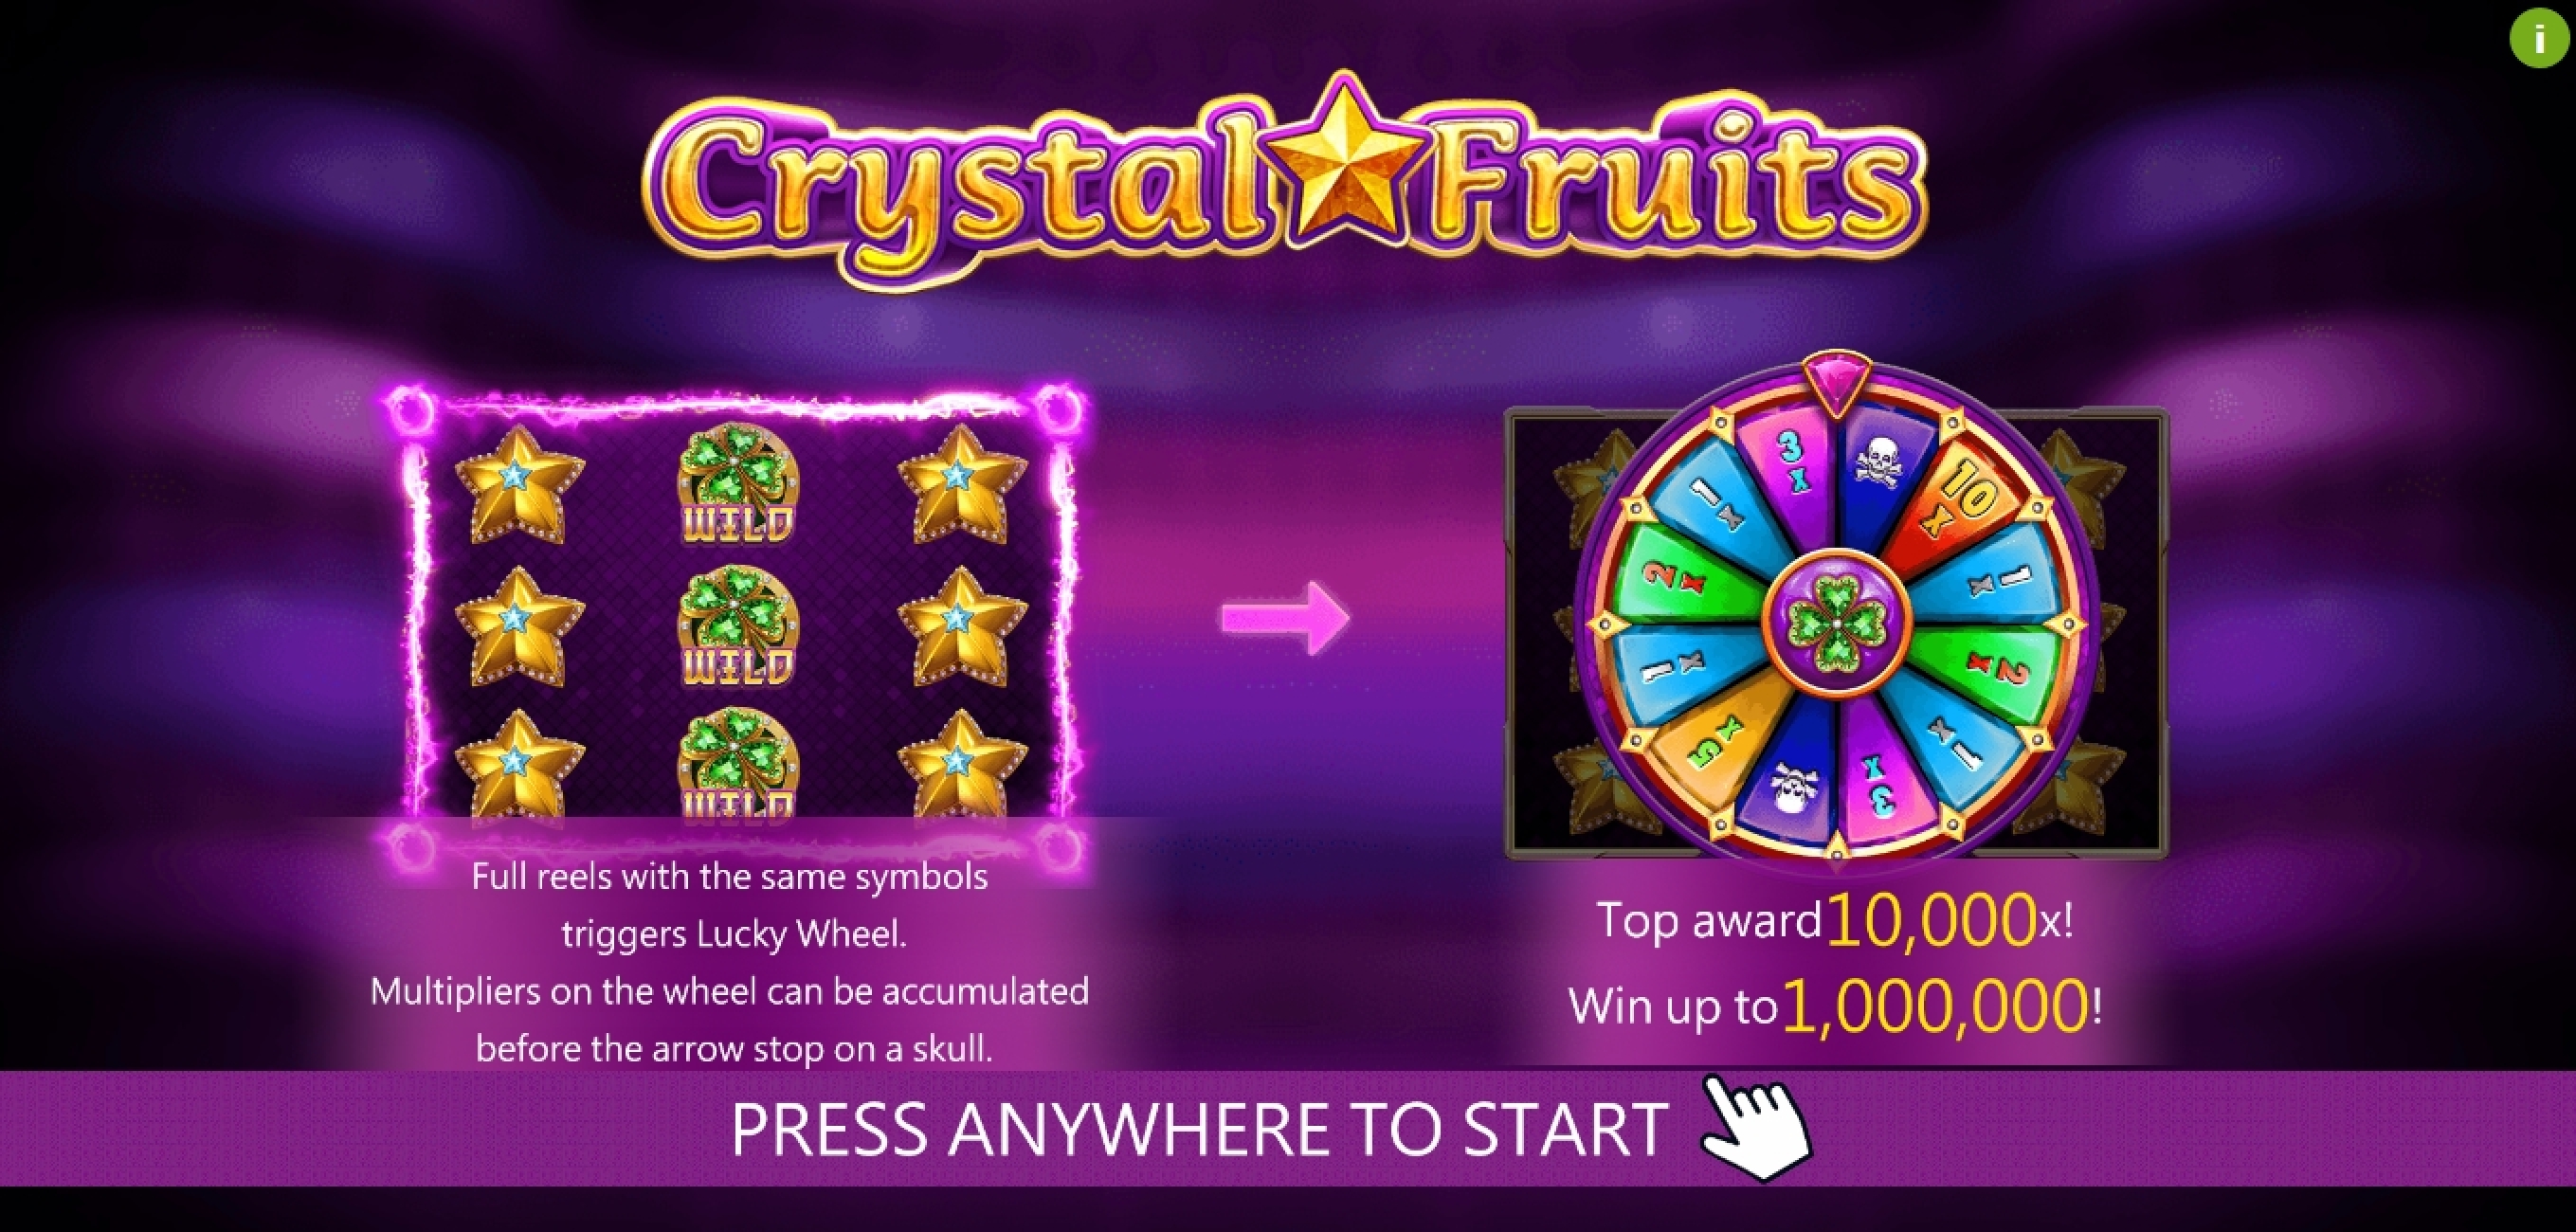 Play Crystal Fruits Free Casino Slot Game by Dragoon Soft